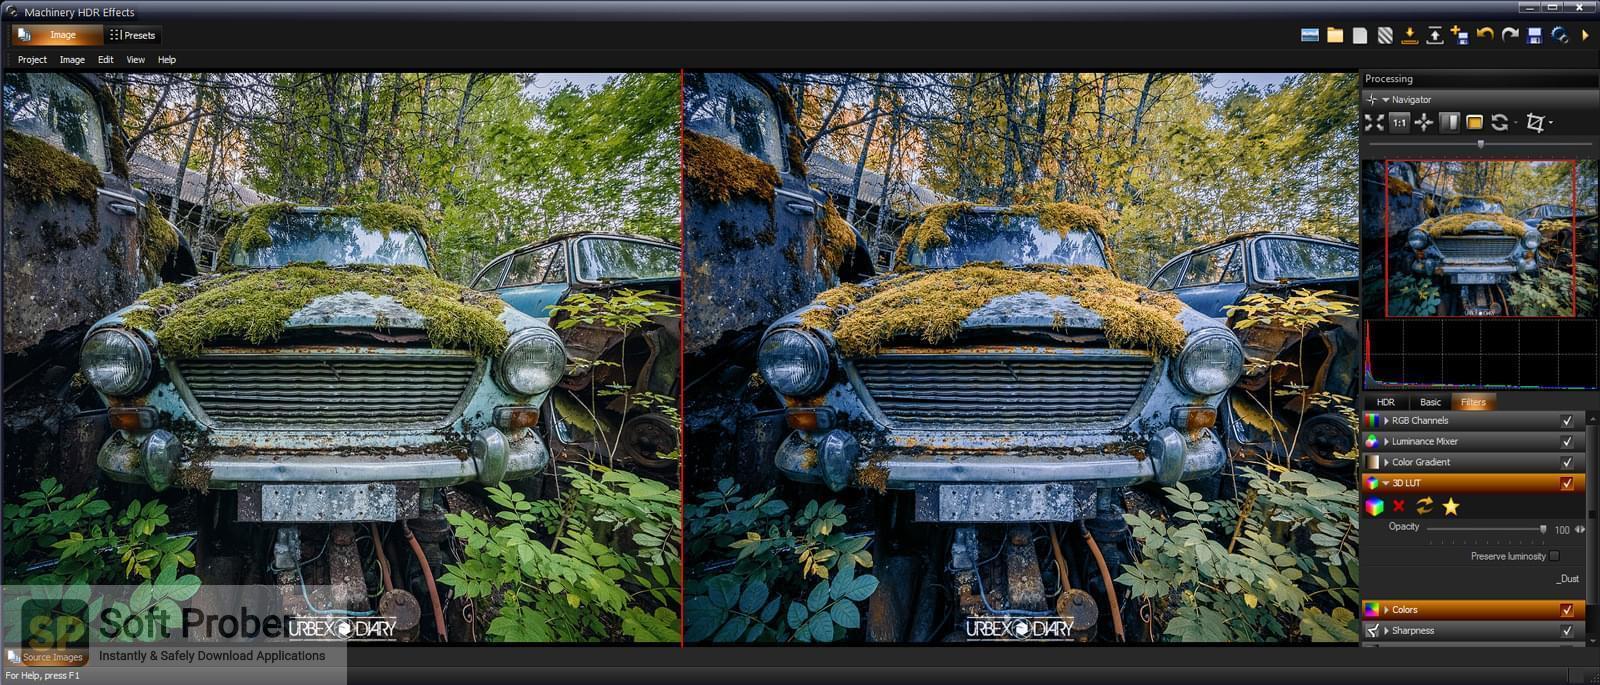 Machinery HDR Effects 3.1.4 free download